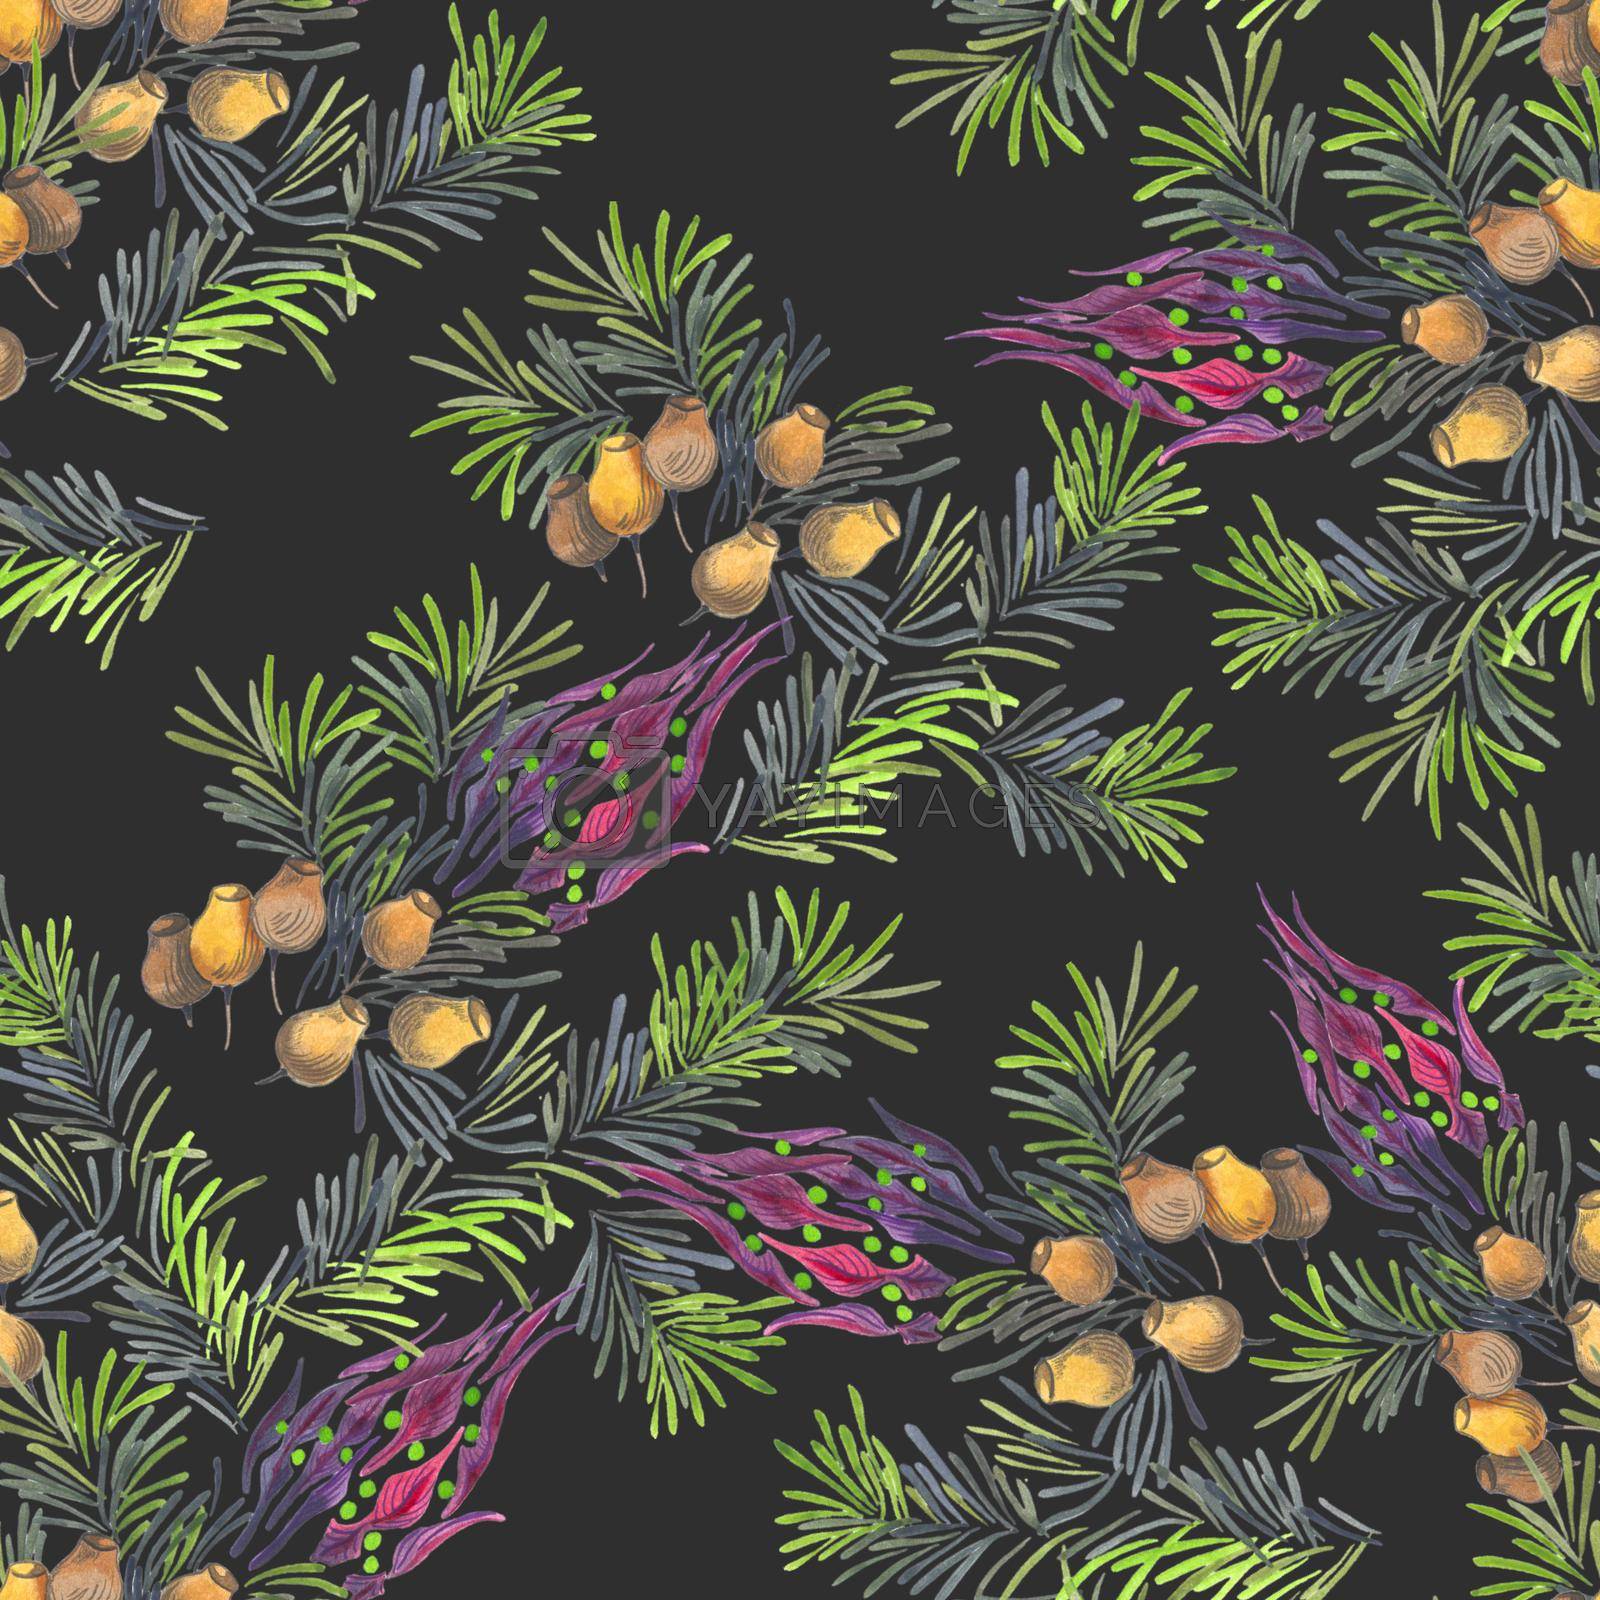 Royalty free image of Seamless pattern of pine fir branches of Christmas tree with cones and flowers decorative design element by fireFLYart